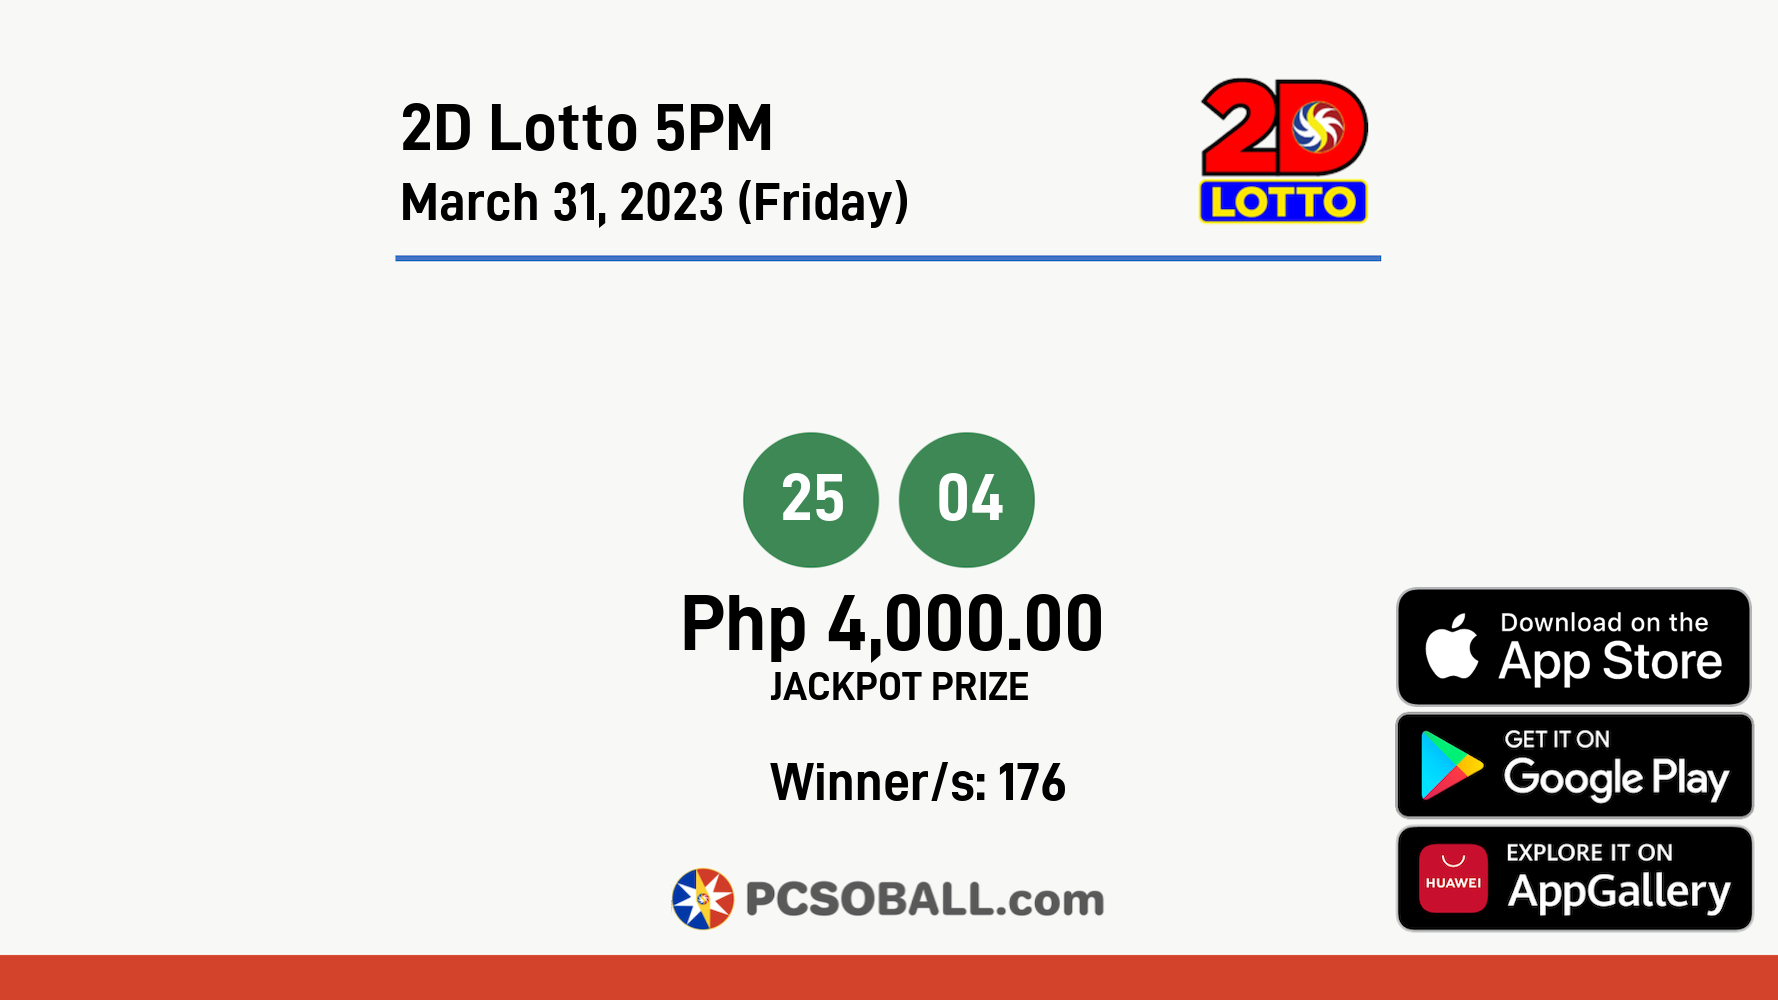 2D Lotto 5PM March 31, 2023 (Friday) Result